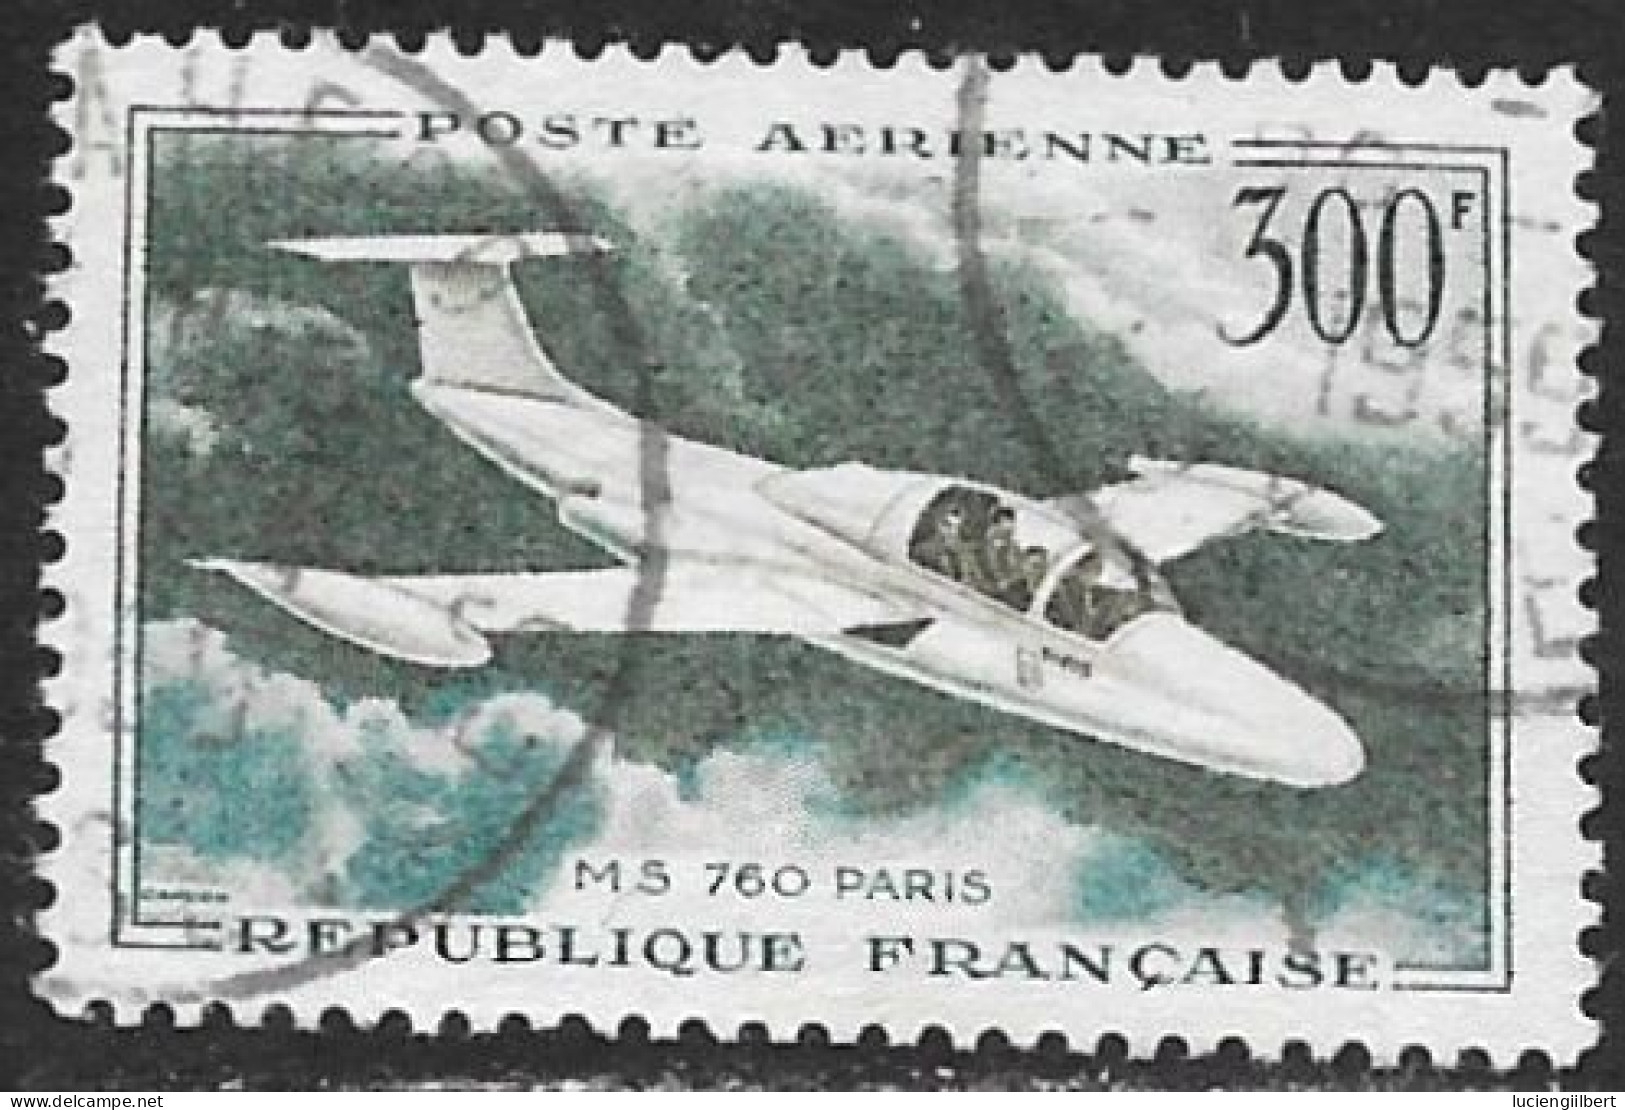 TIMBRE PA N° 35  -  POSTE AERIENNE  -   MS 760 PARIS  -  OBLITERE  - 1958 - 1927-1959 Used